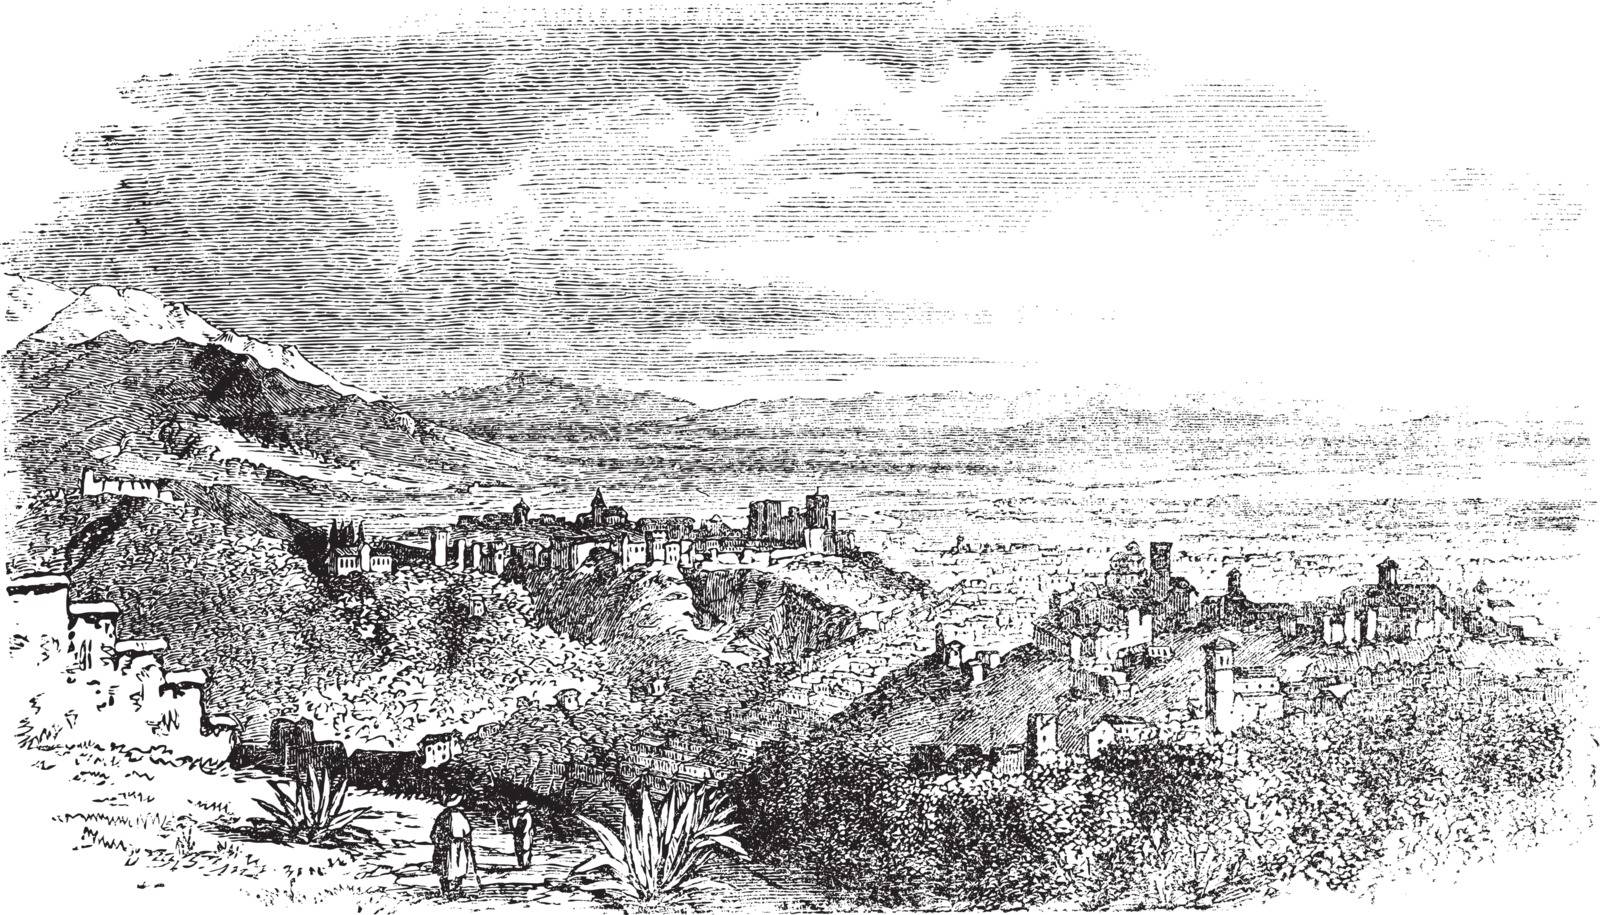 View of village at Granada, Andalusia, Spain vintage engraving by Morphart